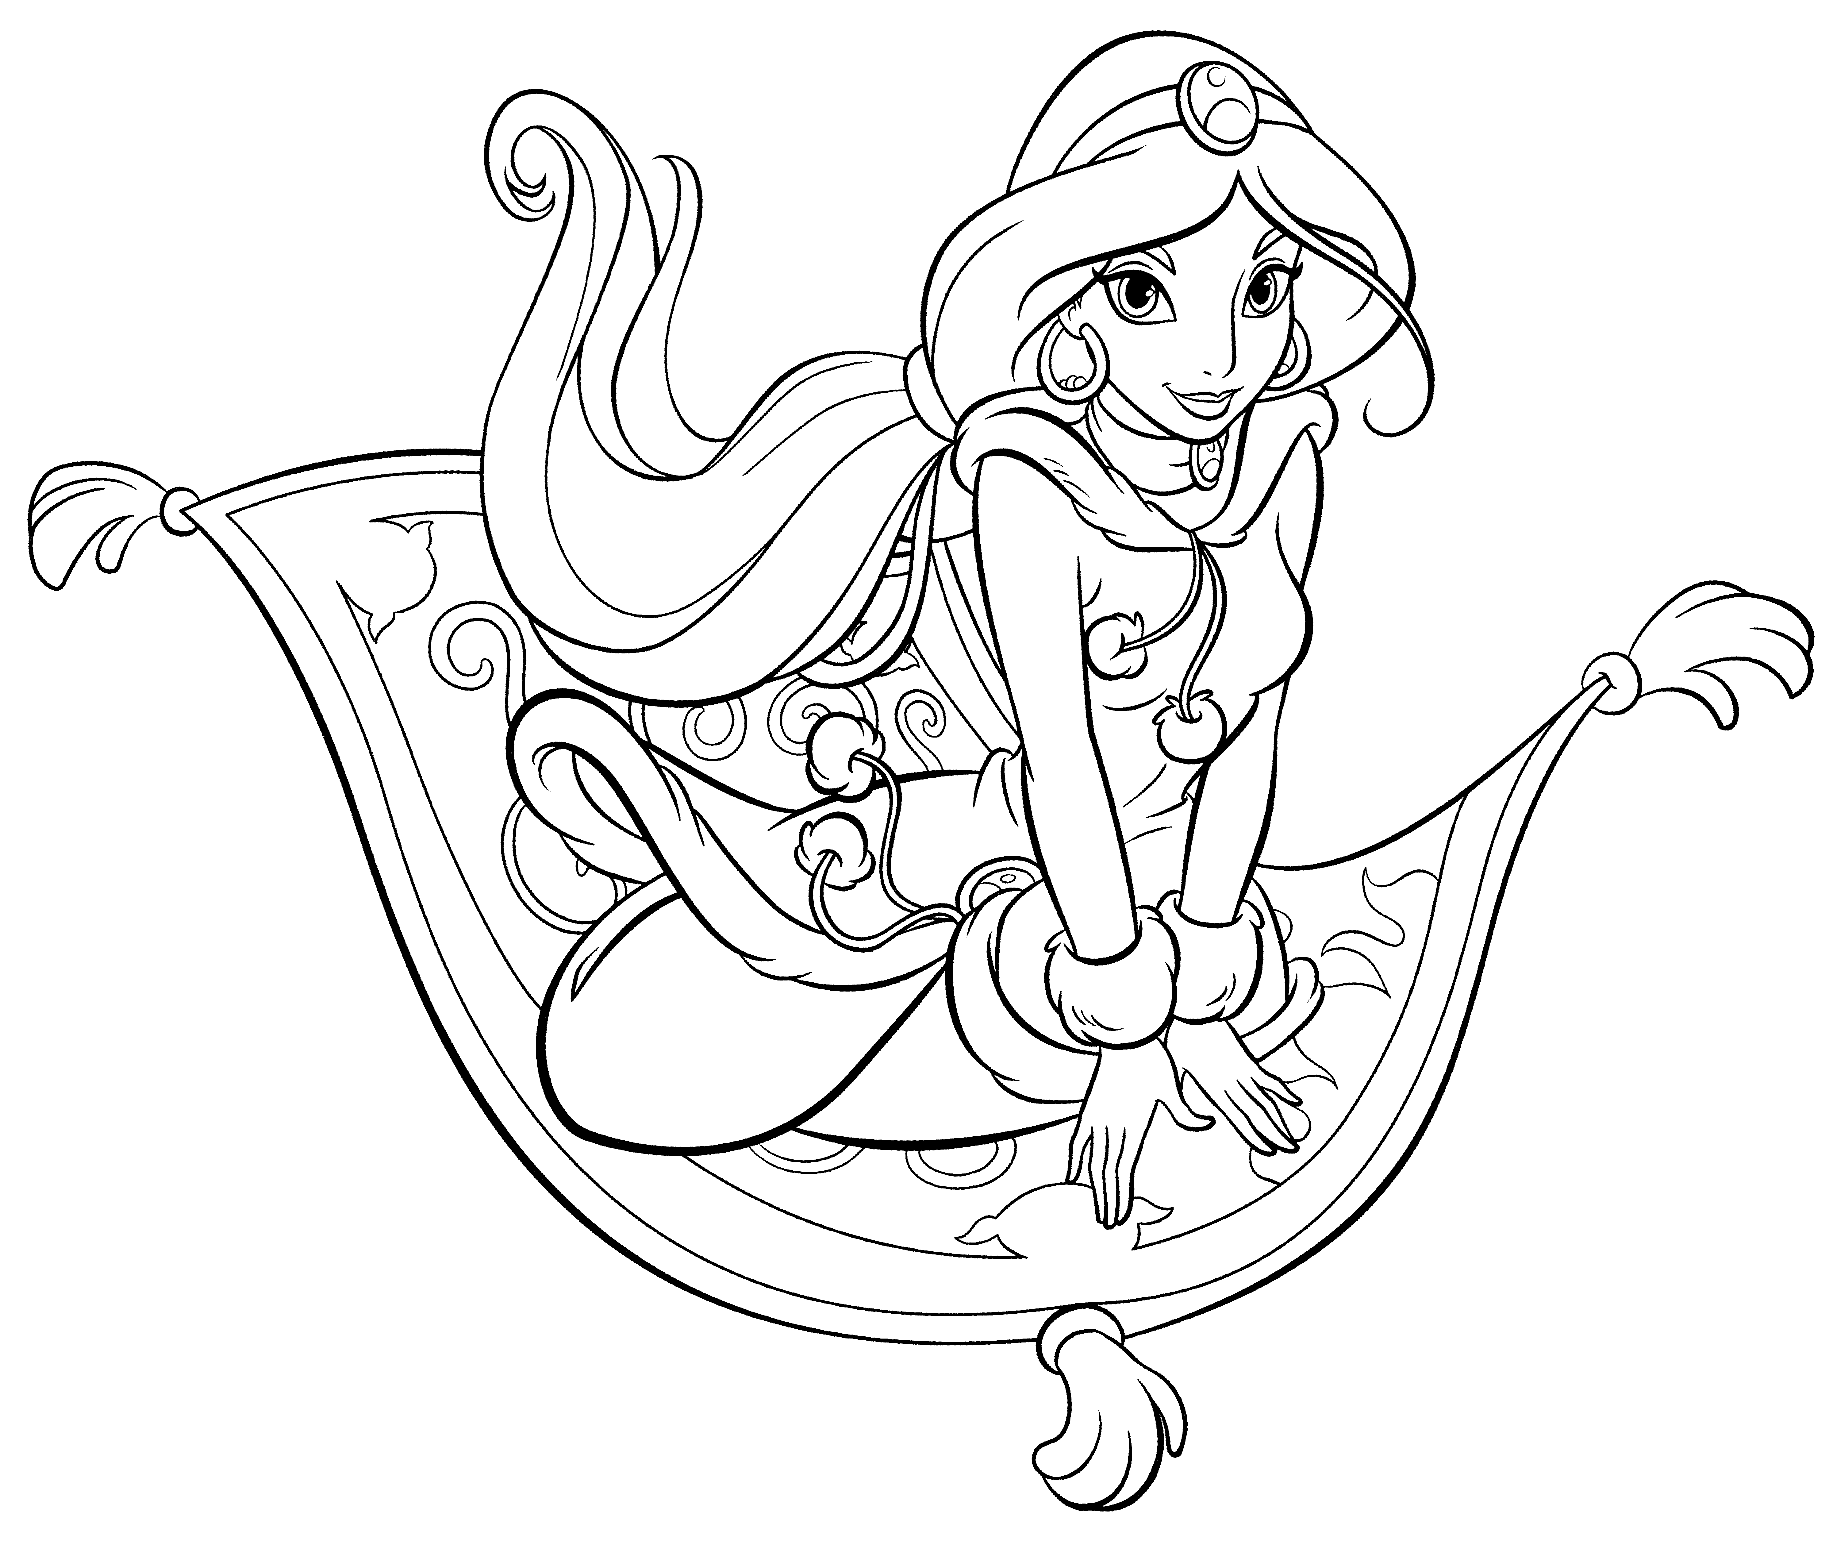 Jasmine on the carpet from Aladdin Coloring Page